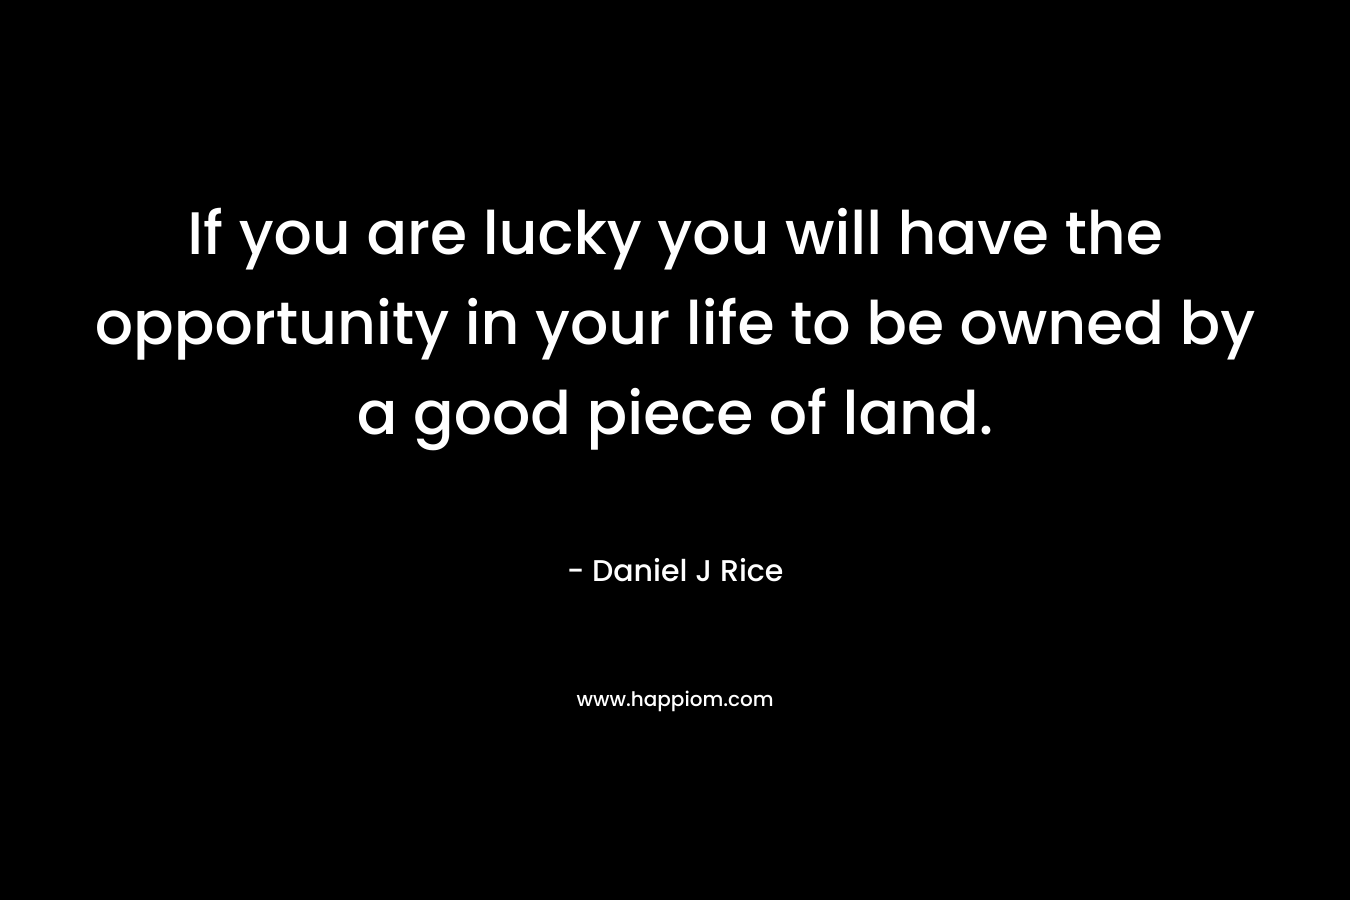 If you are lucky you will have the opportunity in your life to be owned by a good piece of land.